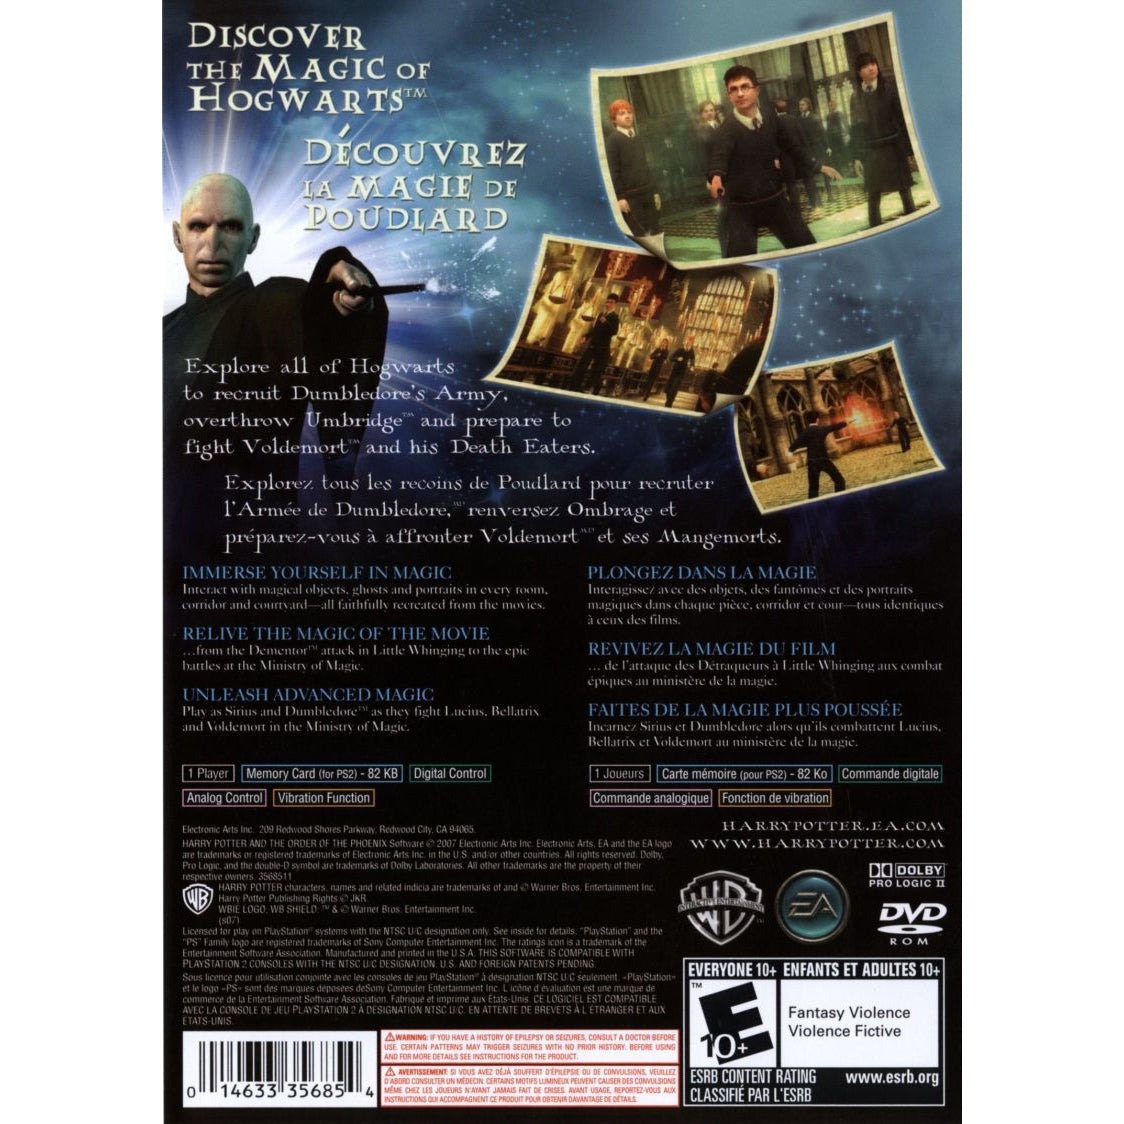 Harry Potter and the Order of the Phoenix - PlayStation 2 (PS2) Game Complete - YourGamingShop.com - Buy, Sell, Trade Video Games Online. 120 Day Warranty. Satisfaction Guaranteed.